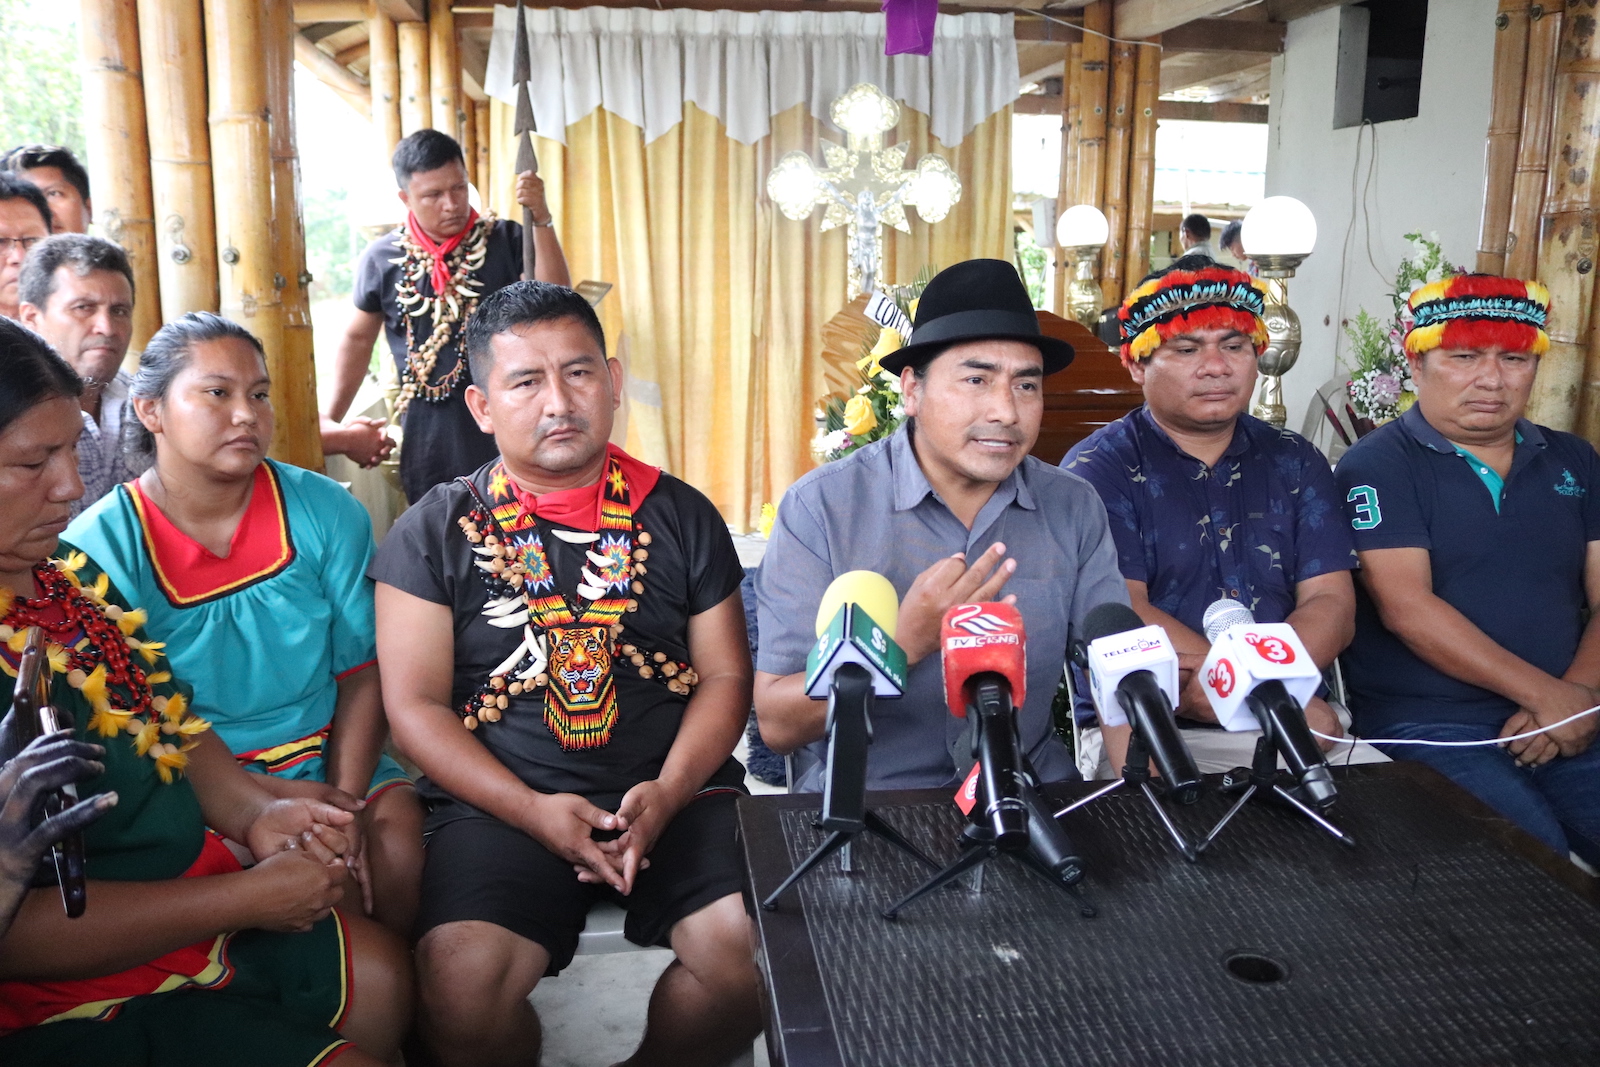 A group of people gather looking somber. A man in a black hat speaks toward a table covered in several microphones. Next to him, a man in a black shirt and elaborate beaded necklaces listens.